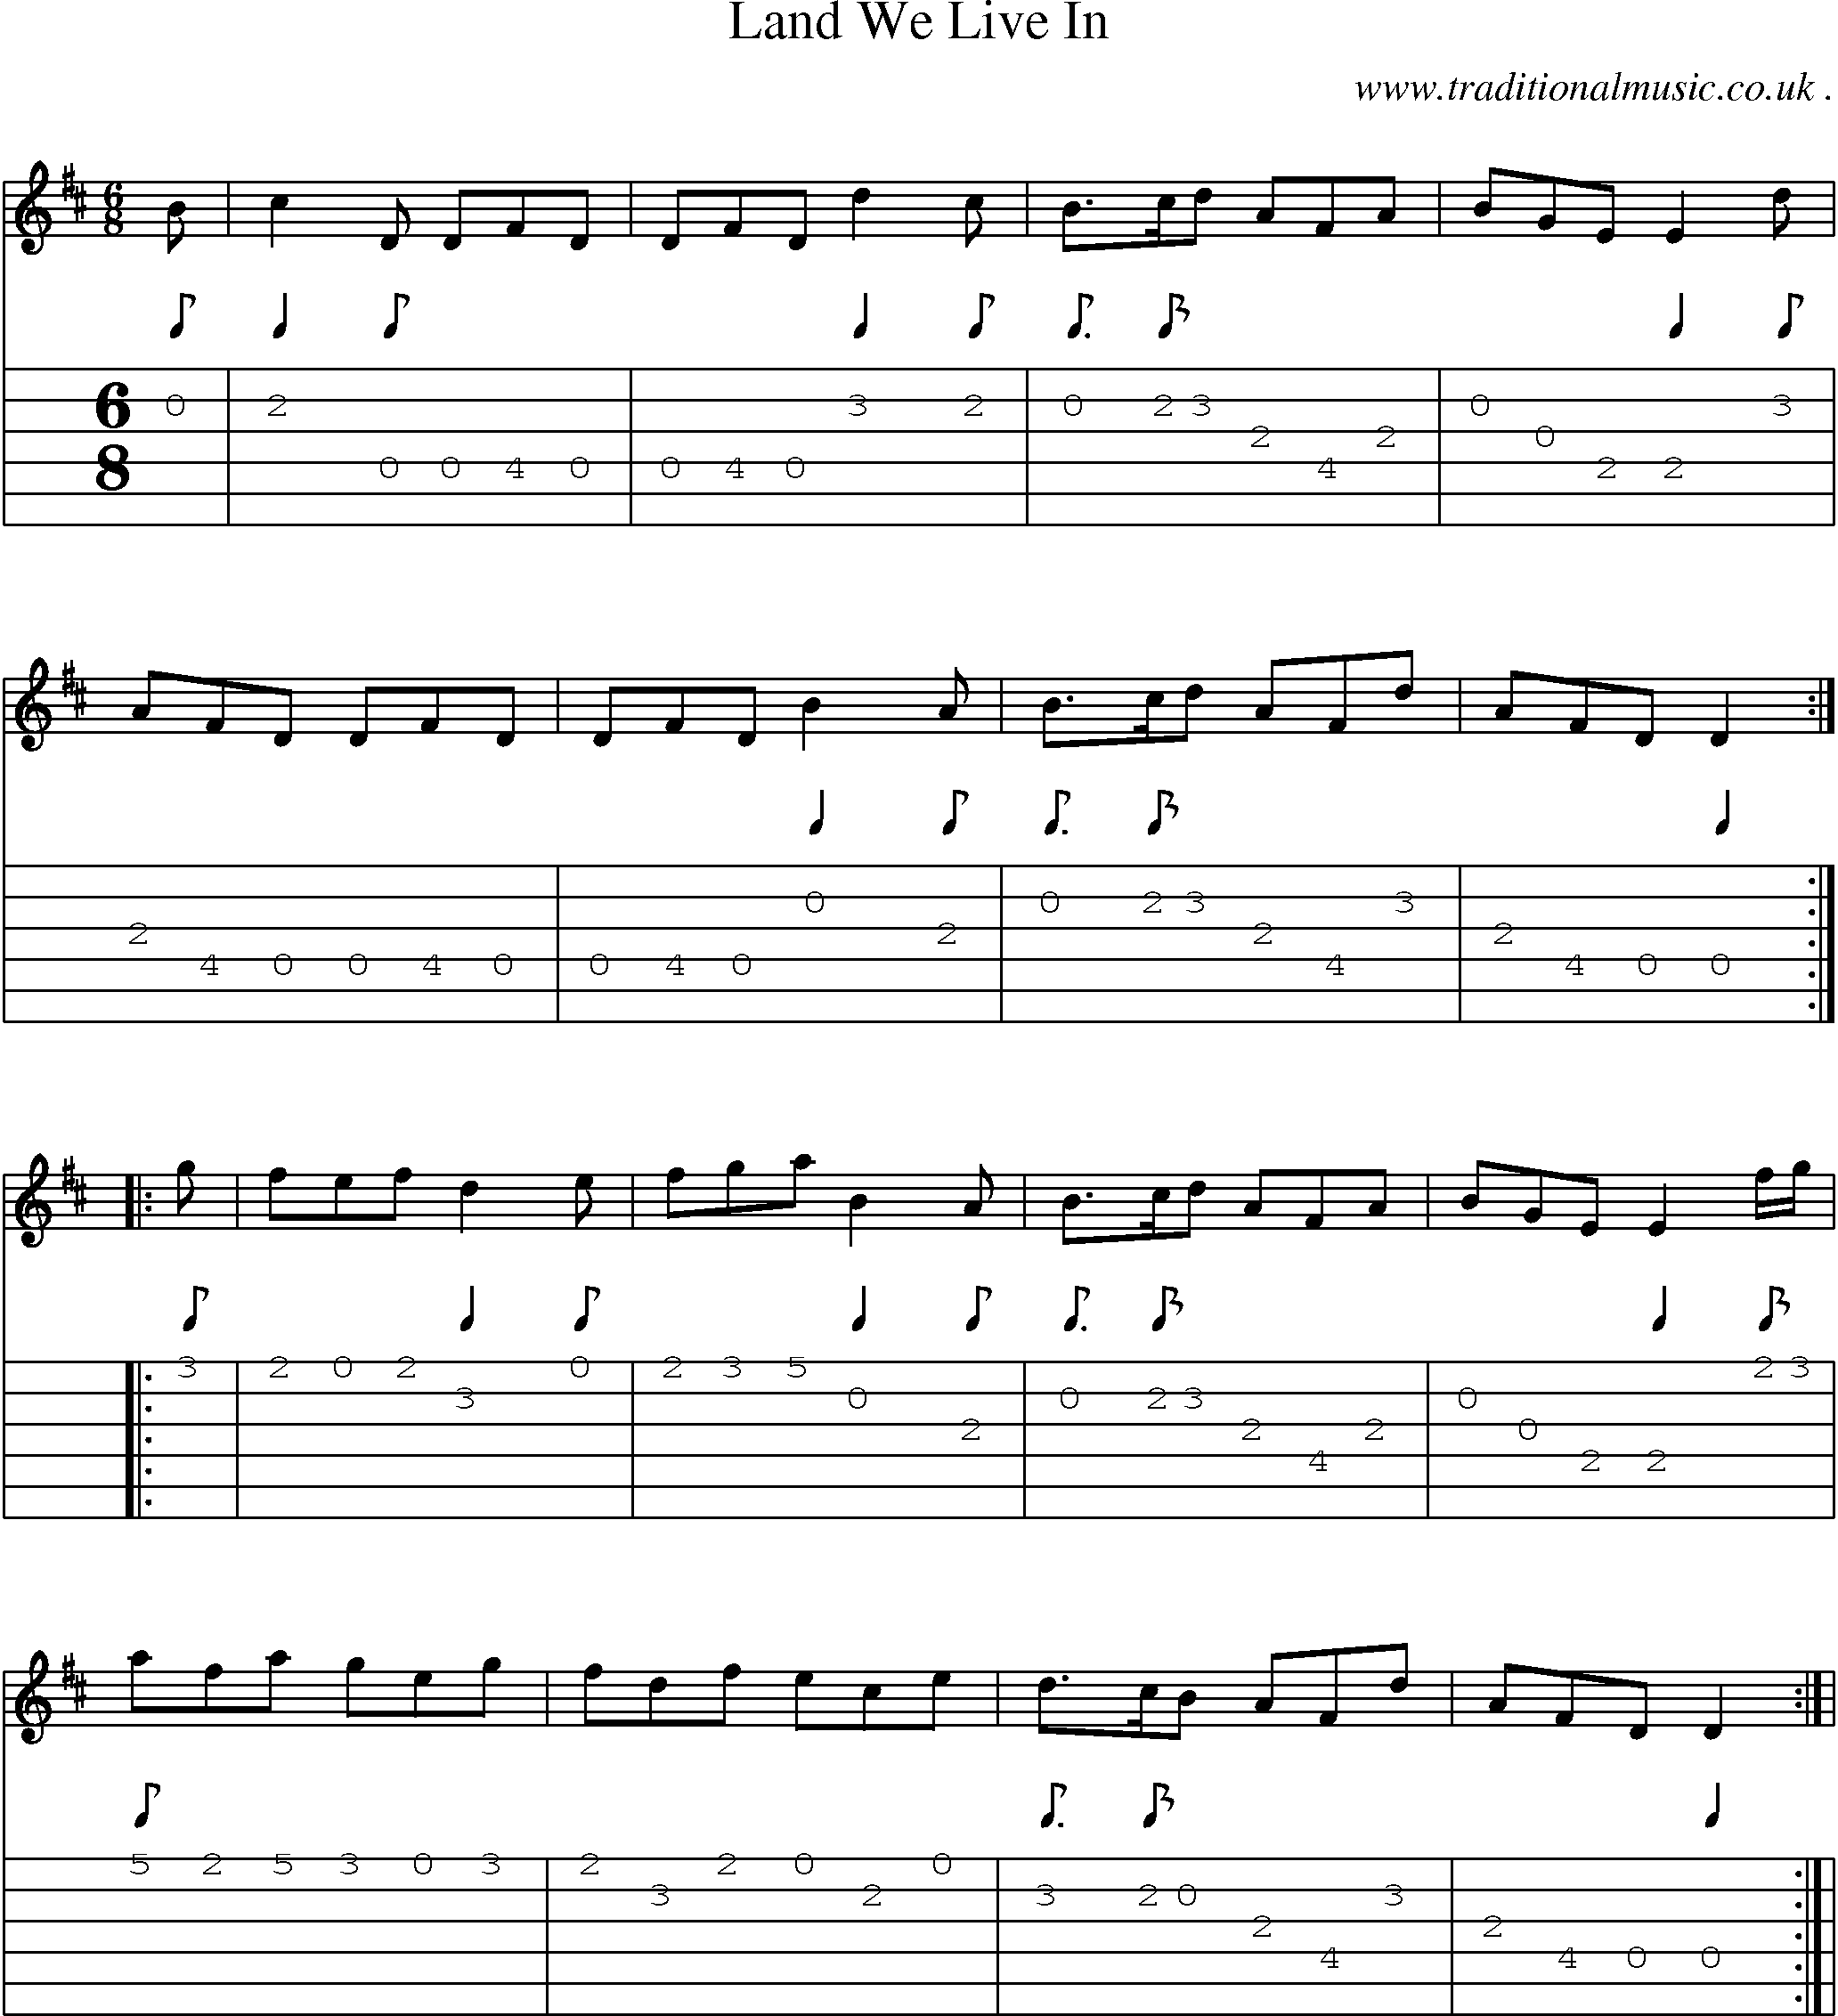 Sheet-Music and Guitar Tabs for Land We Live In